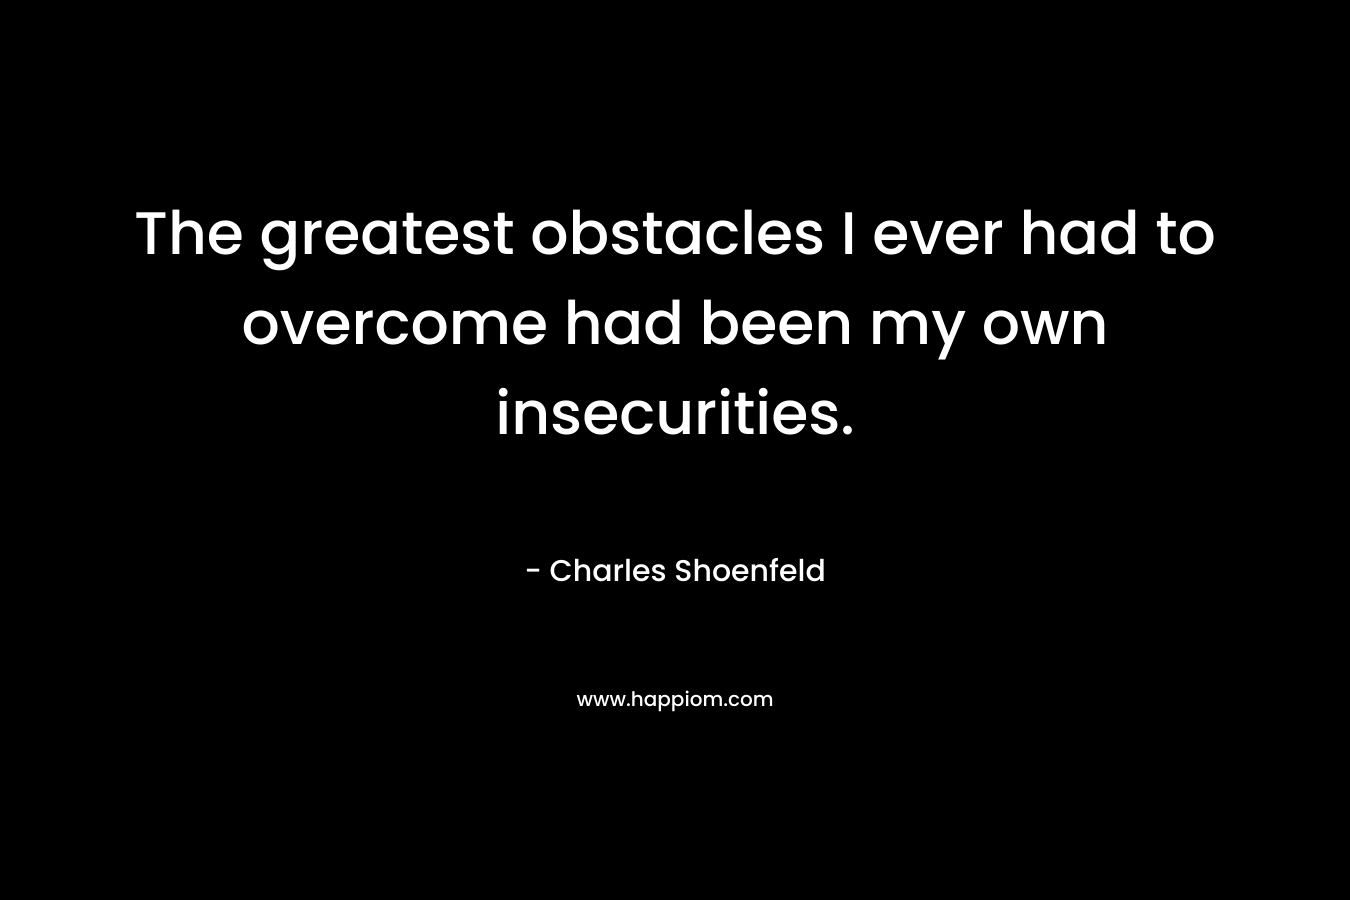 The greatest obstacles I ever had to overcome had been my own insecurities. – Charles Shoenfeld